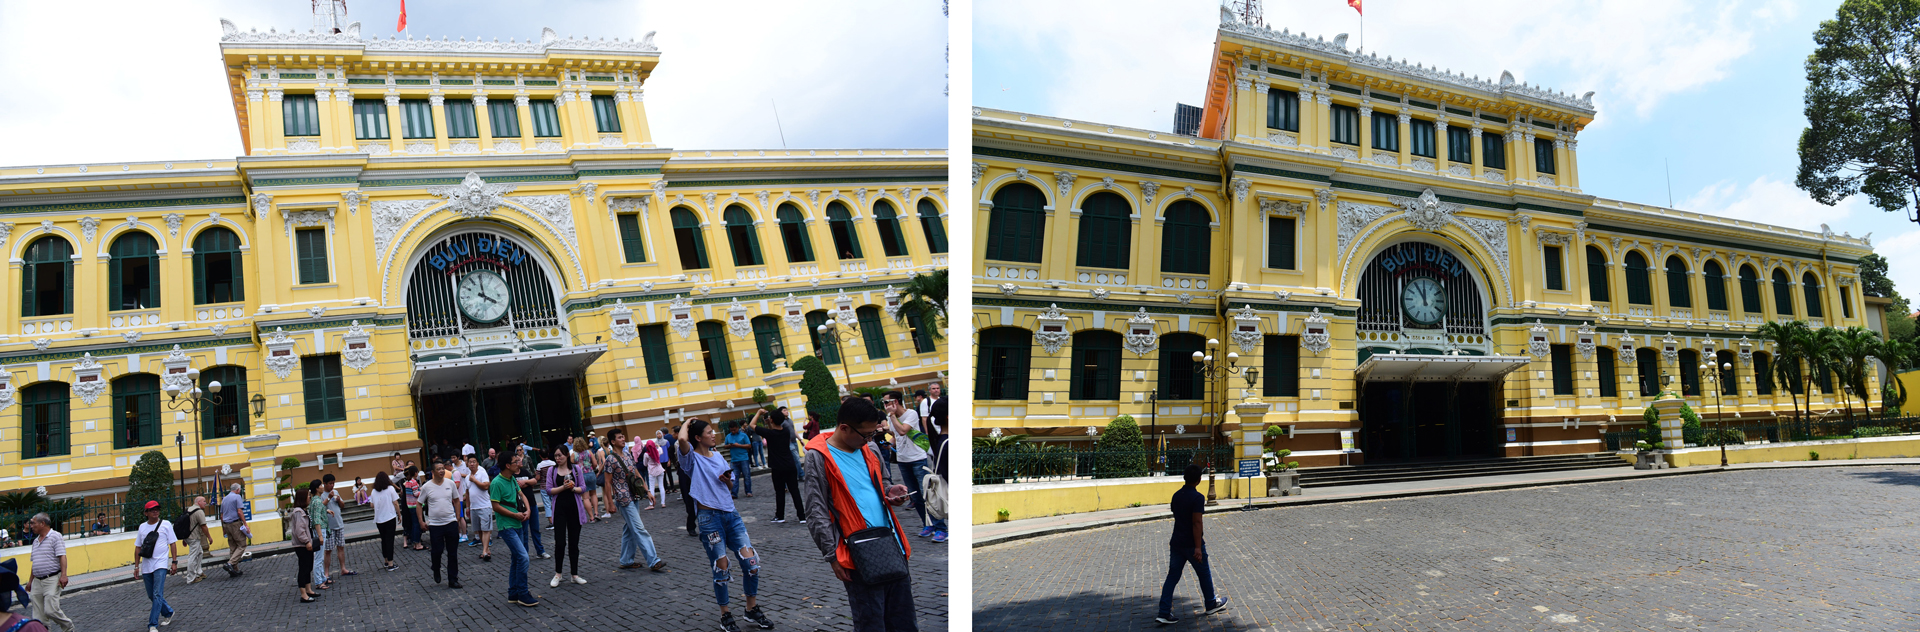 The Central Post Office in Ho Chi Minh City, Vietnam before (left) and during (right) the COVID-19 epidemic. Photos: Truc Phuong / Tuoi Tre